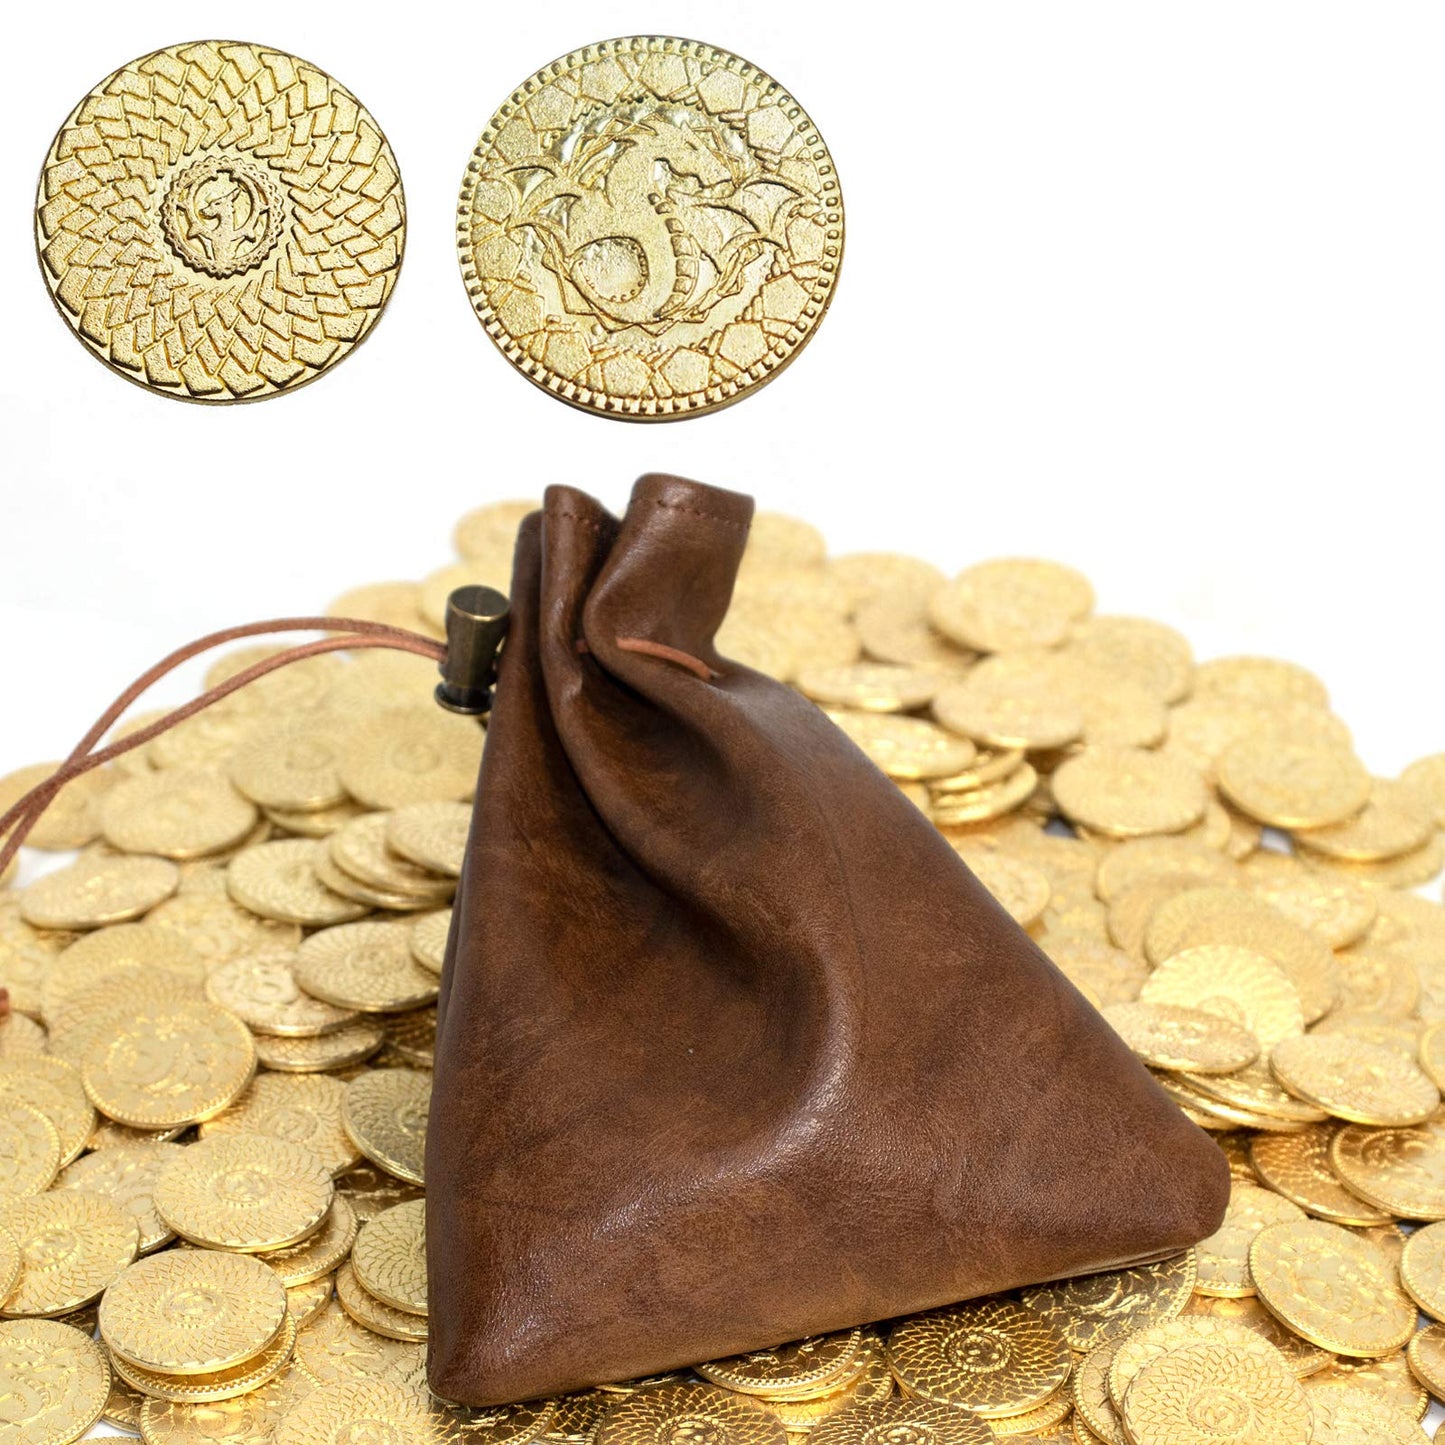 50 DND Coins Fantasy Coins & Leather Bag Metal Tokens Game Coins for Board Games Table RPG Board Game Accessories Golden Suit for Dungeons & Dragons Medieval Game Retro DND Props